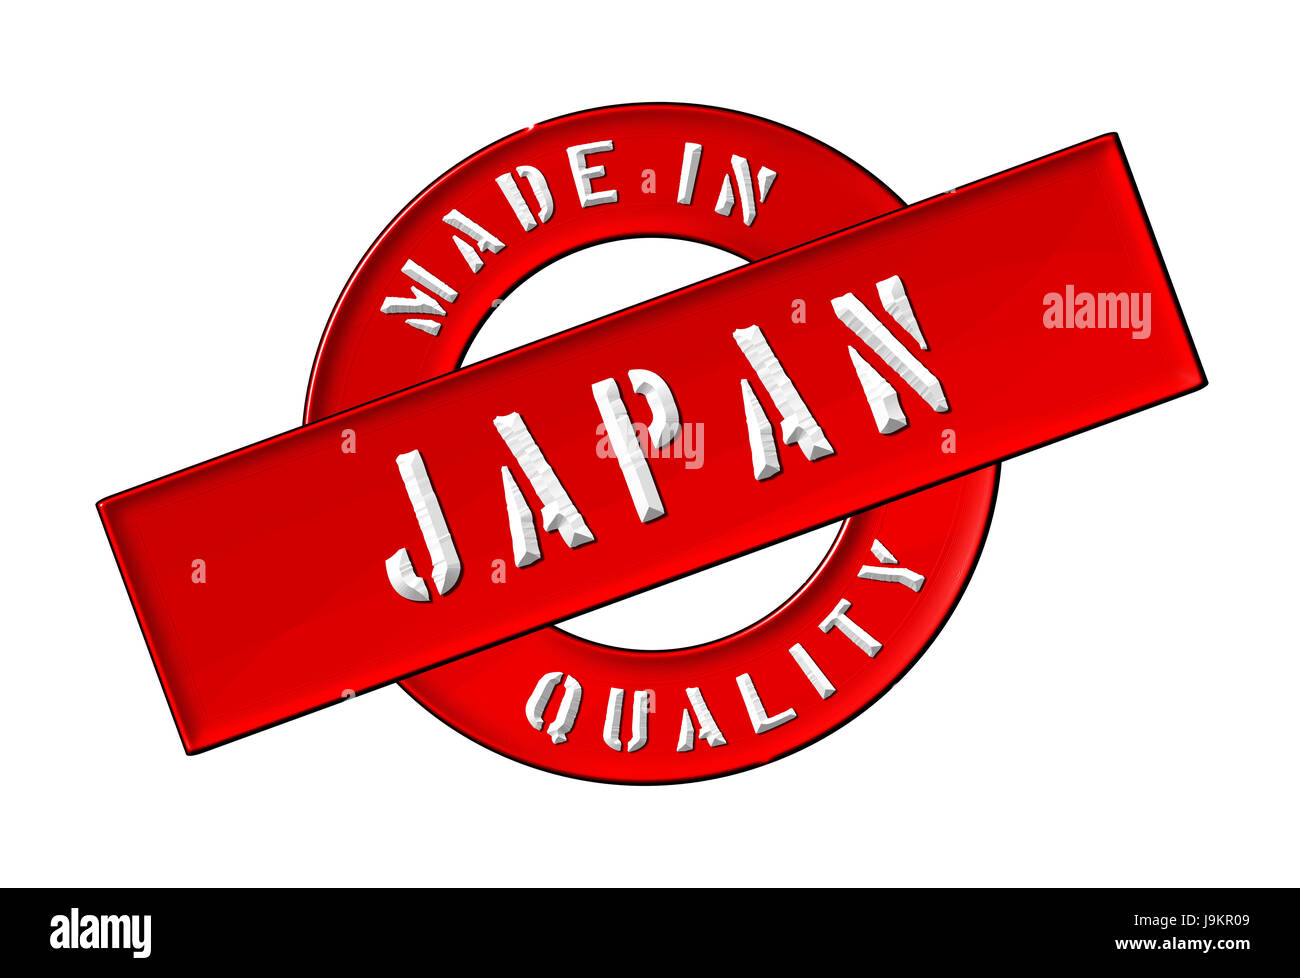 in, japan, made, tokyo, presentation, isolated, asia, in, japan, country, Stock Photo